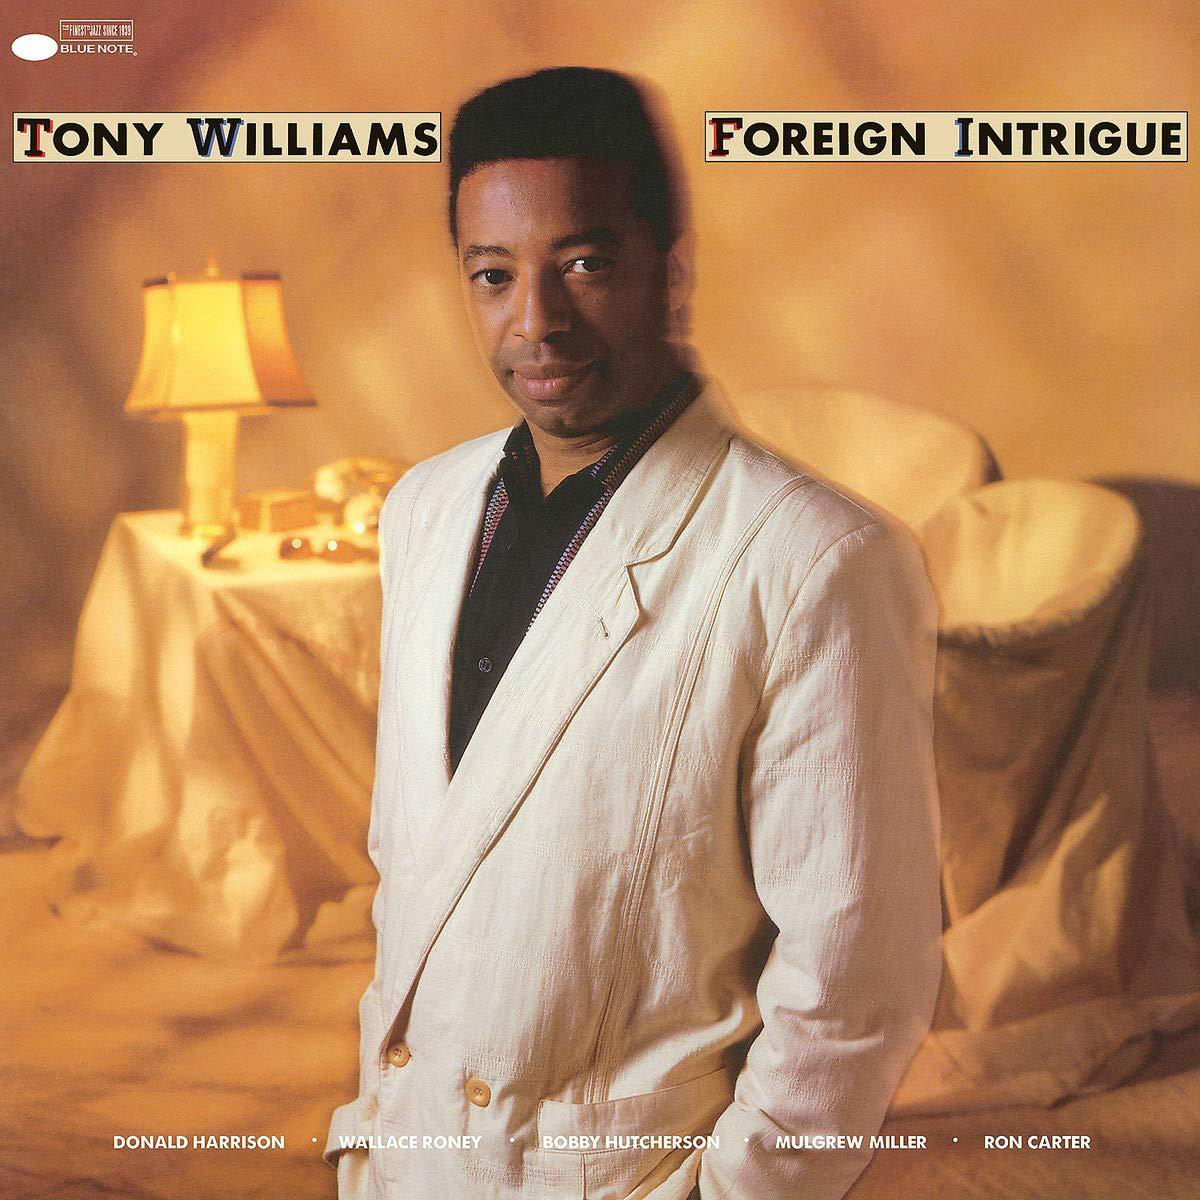 Tony Williams - FOREIGN (Vinyl) INTRIGUE 